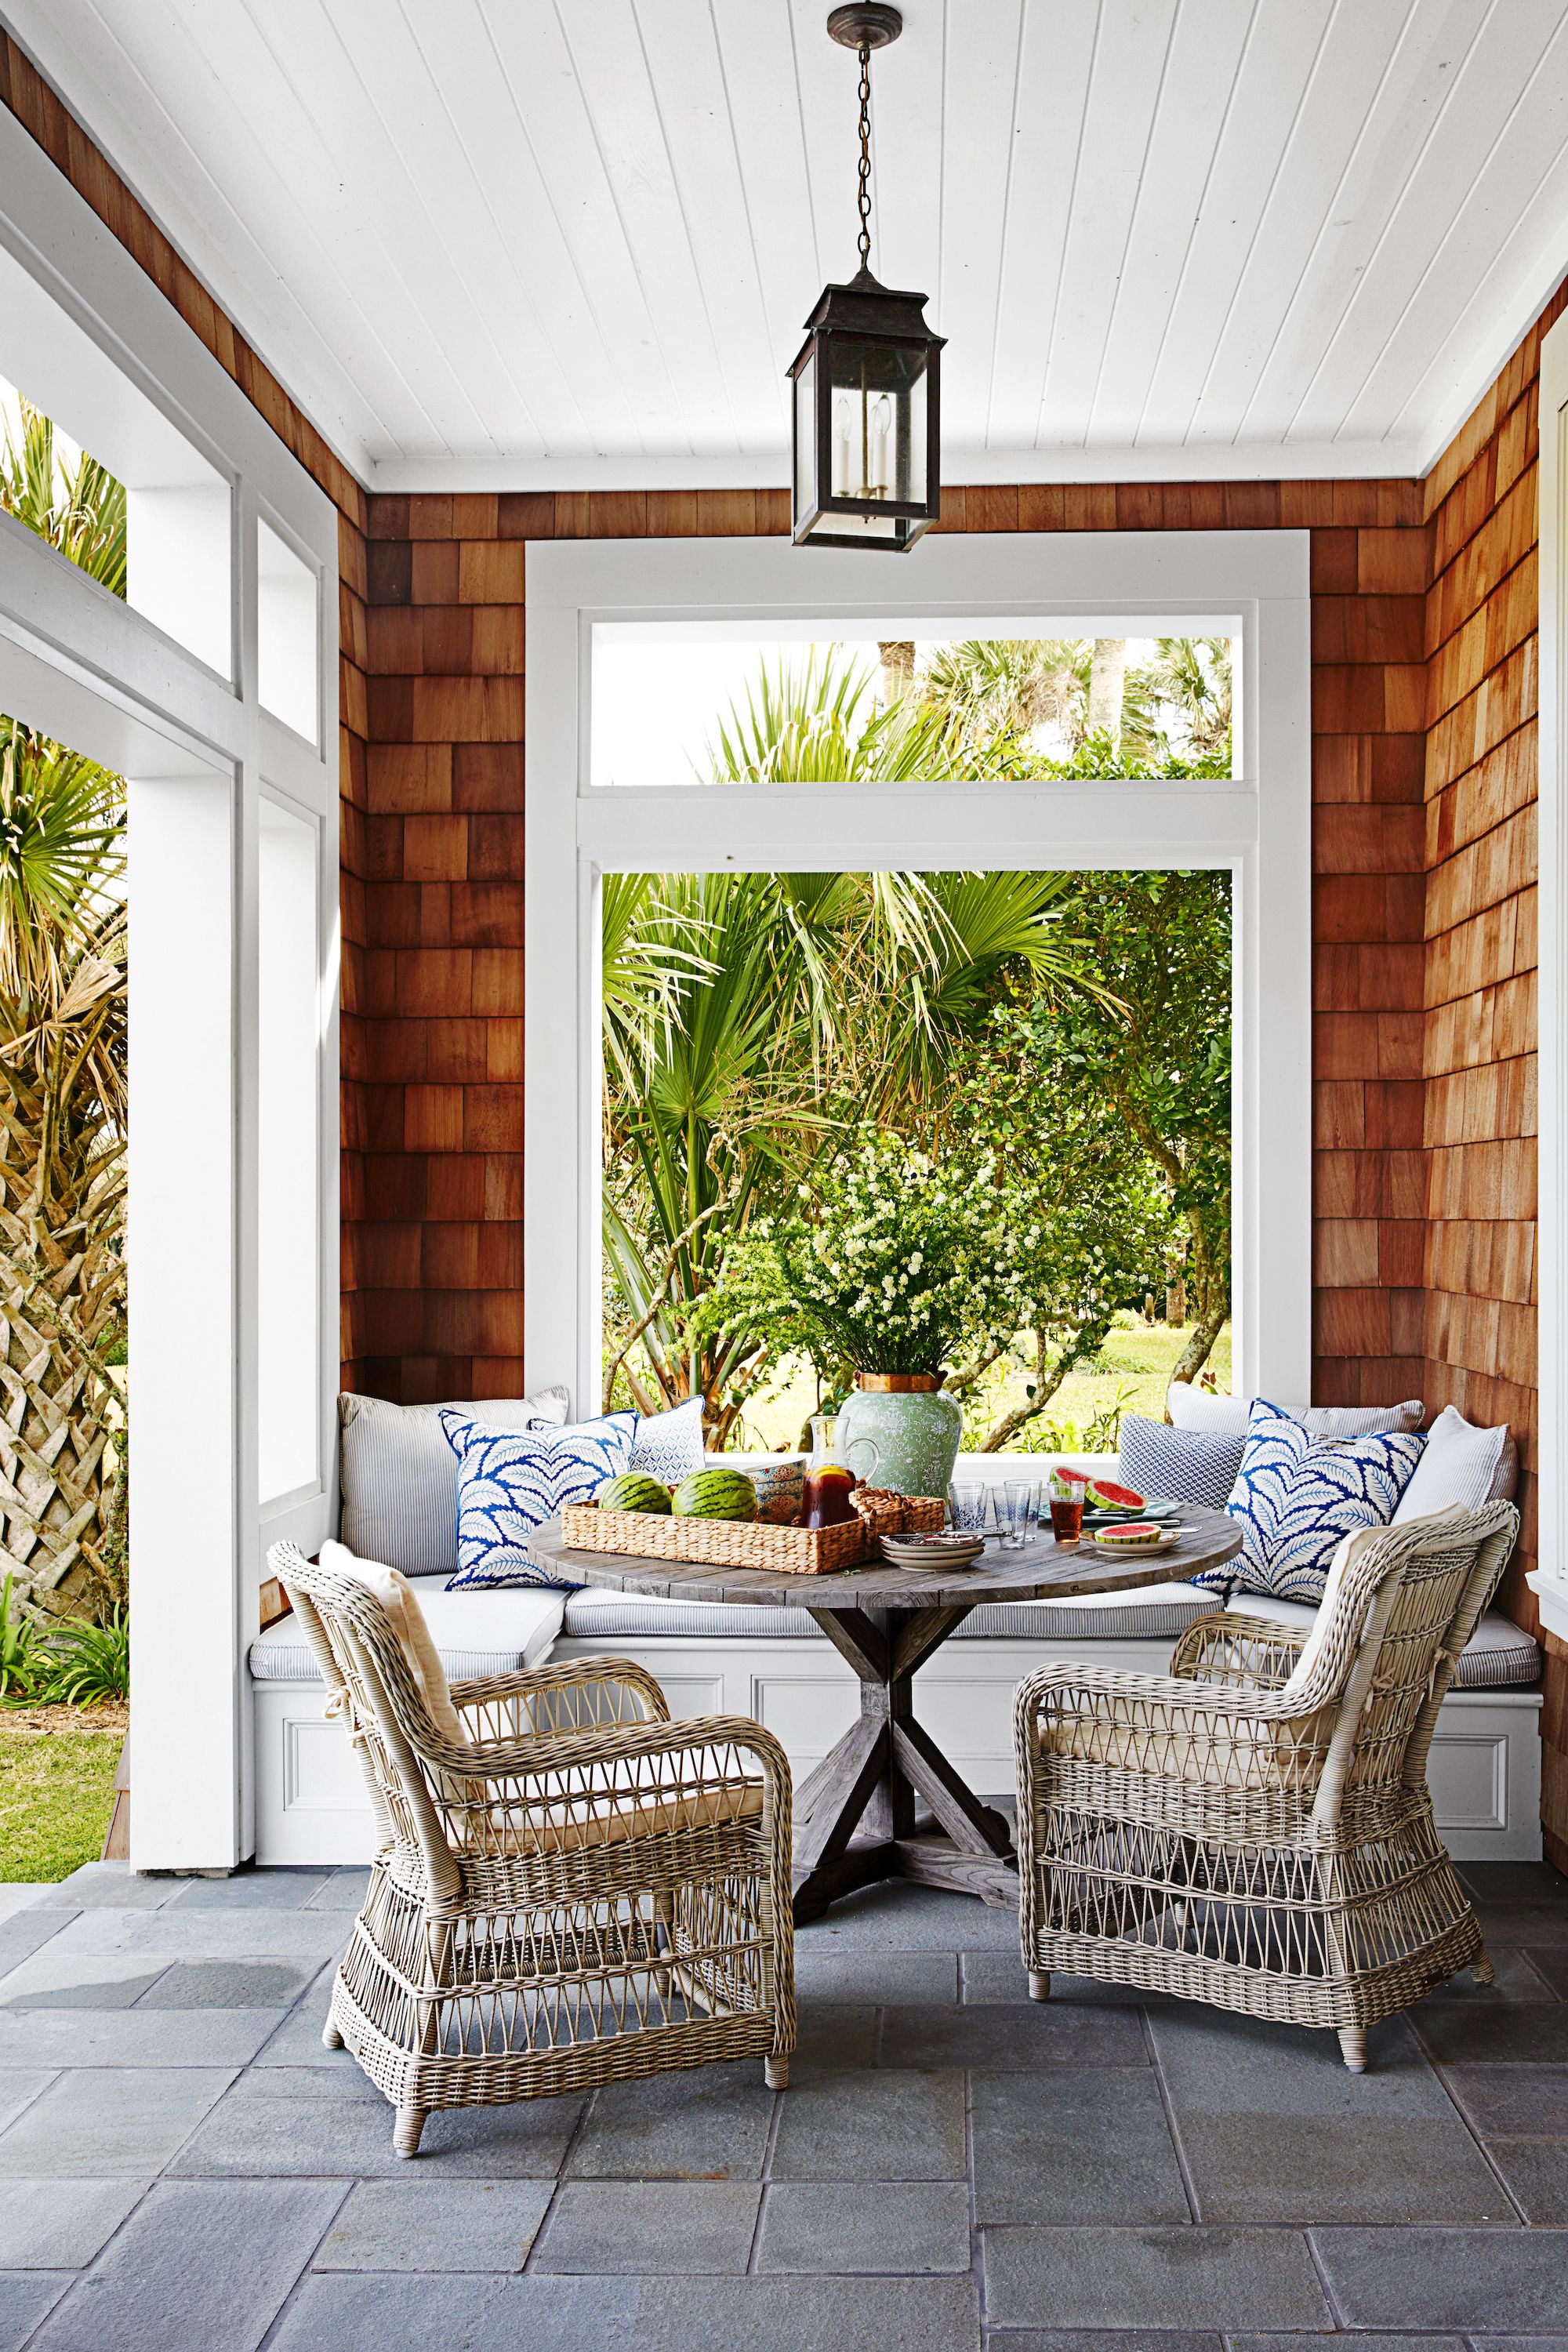 35 Best Patio And Porch Design Ideas Decorating Your Outdoor Space